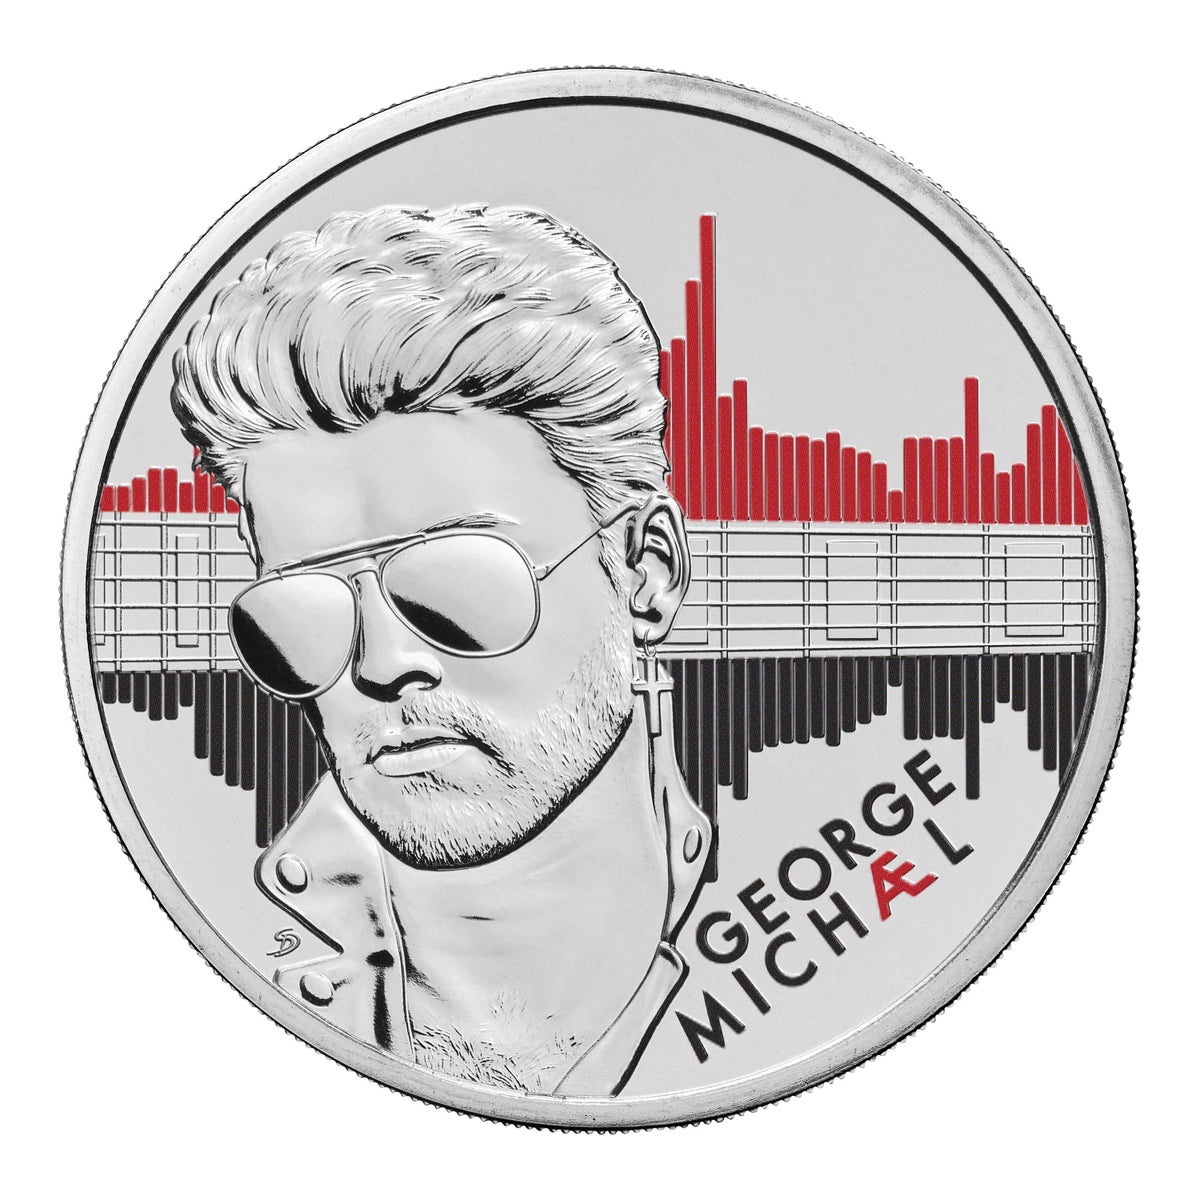 From gold records to gold coins. George Michael is now honoured with a commemorative minting 